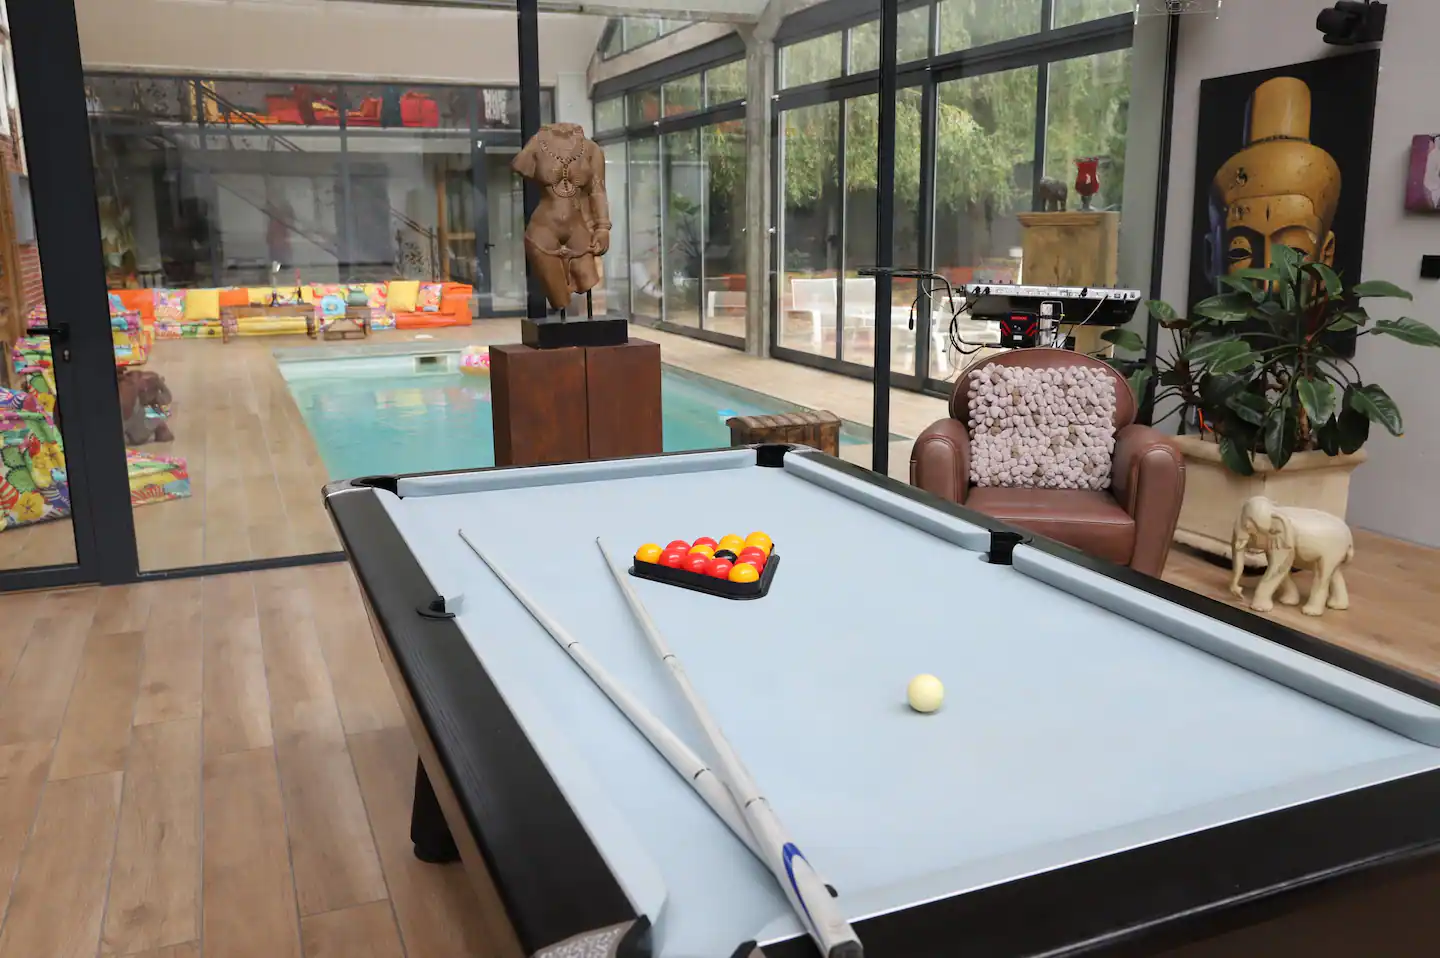 A heated indoor pool, sauna, gym, hairdresser, billiards and dart games as well as a mixing table and light games will be at your disposal.